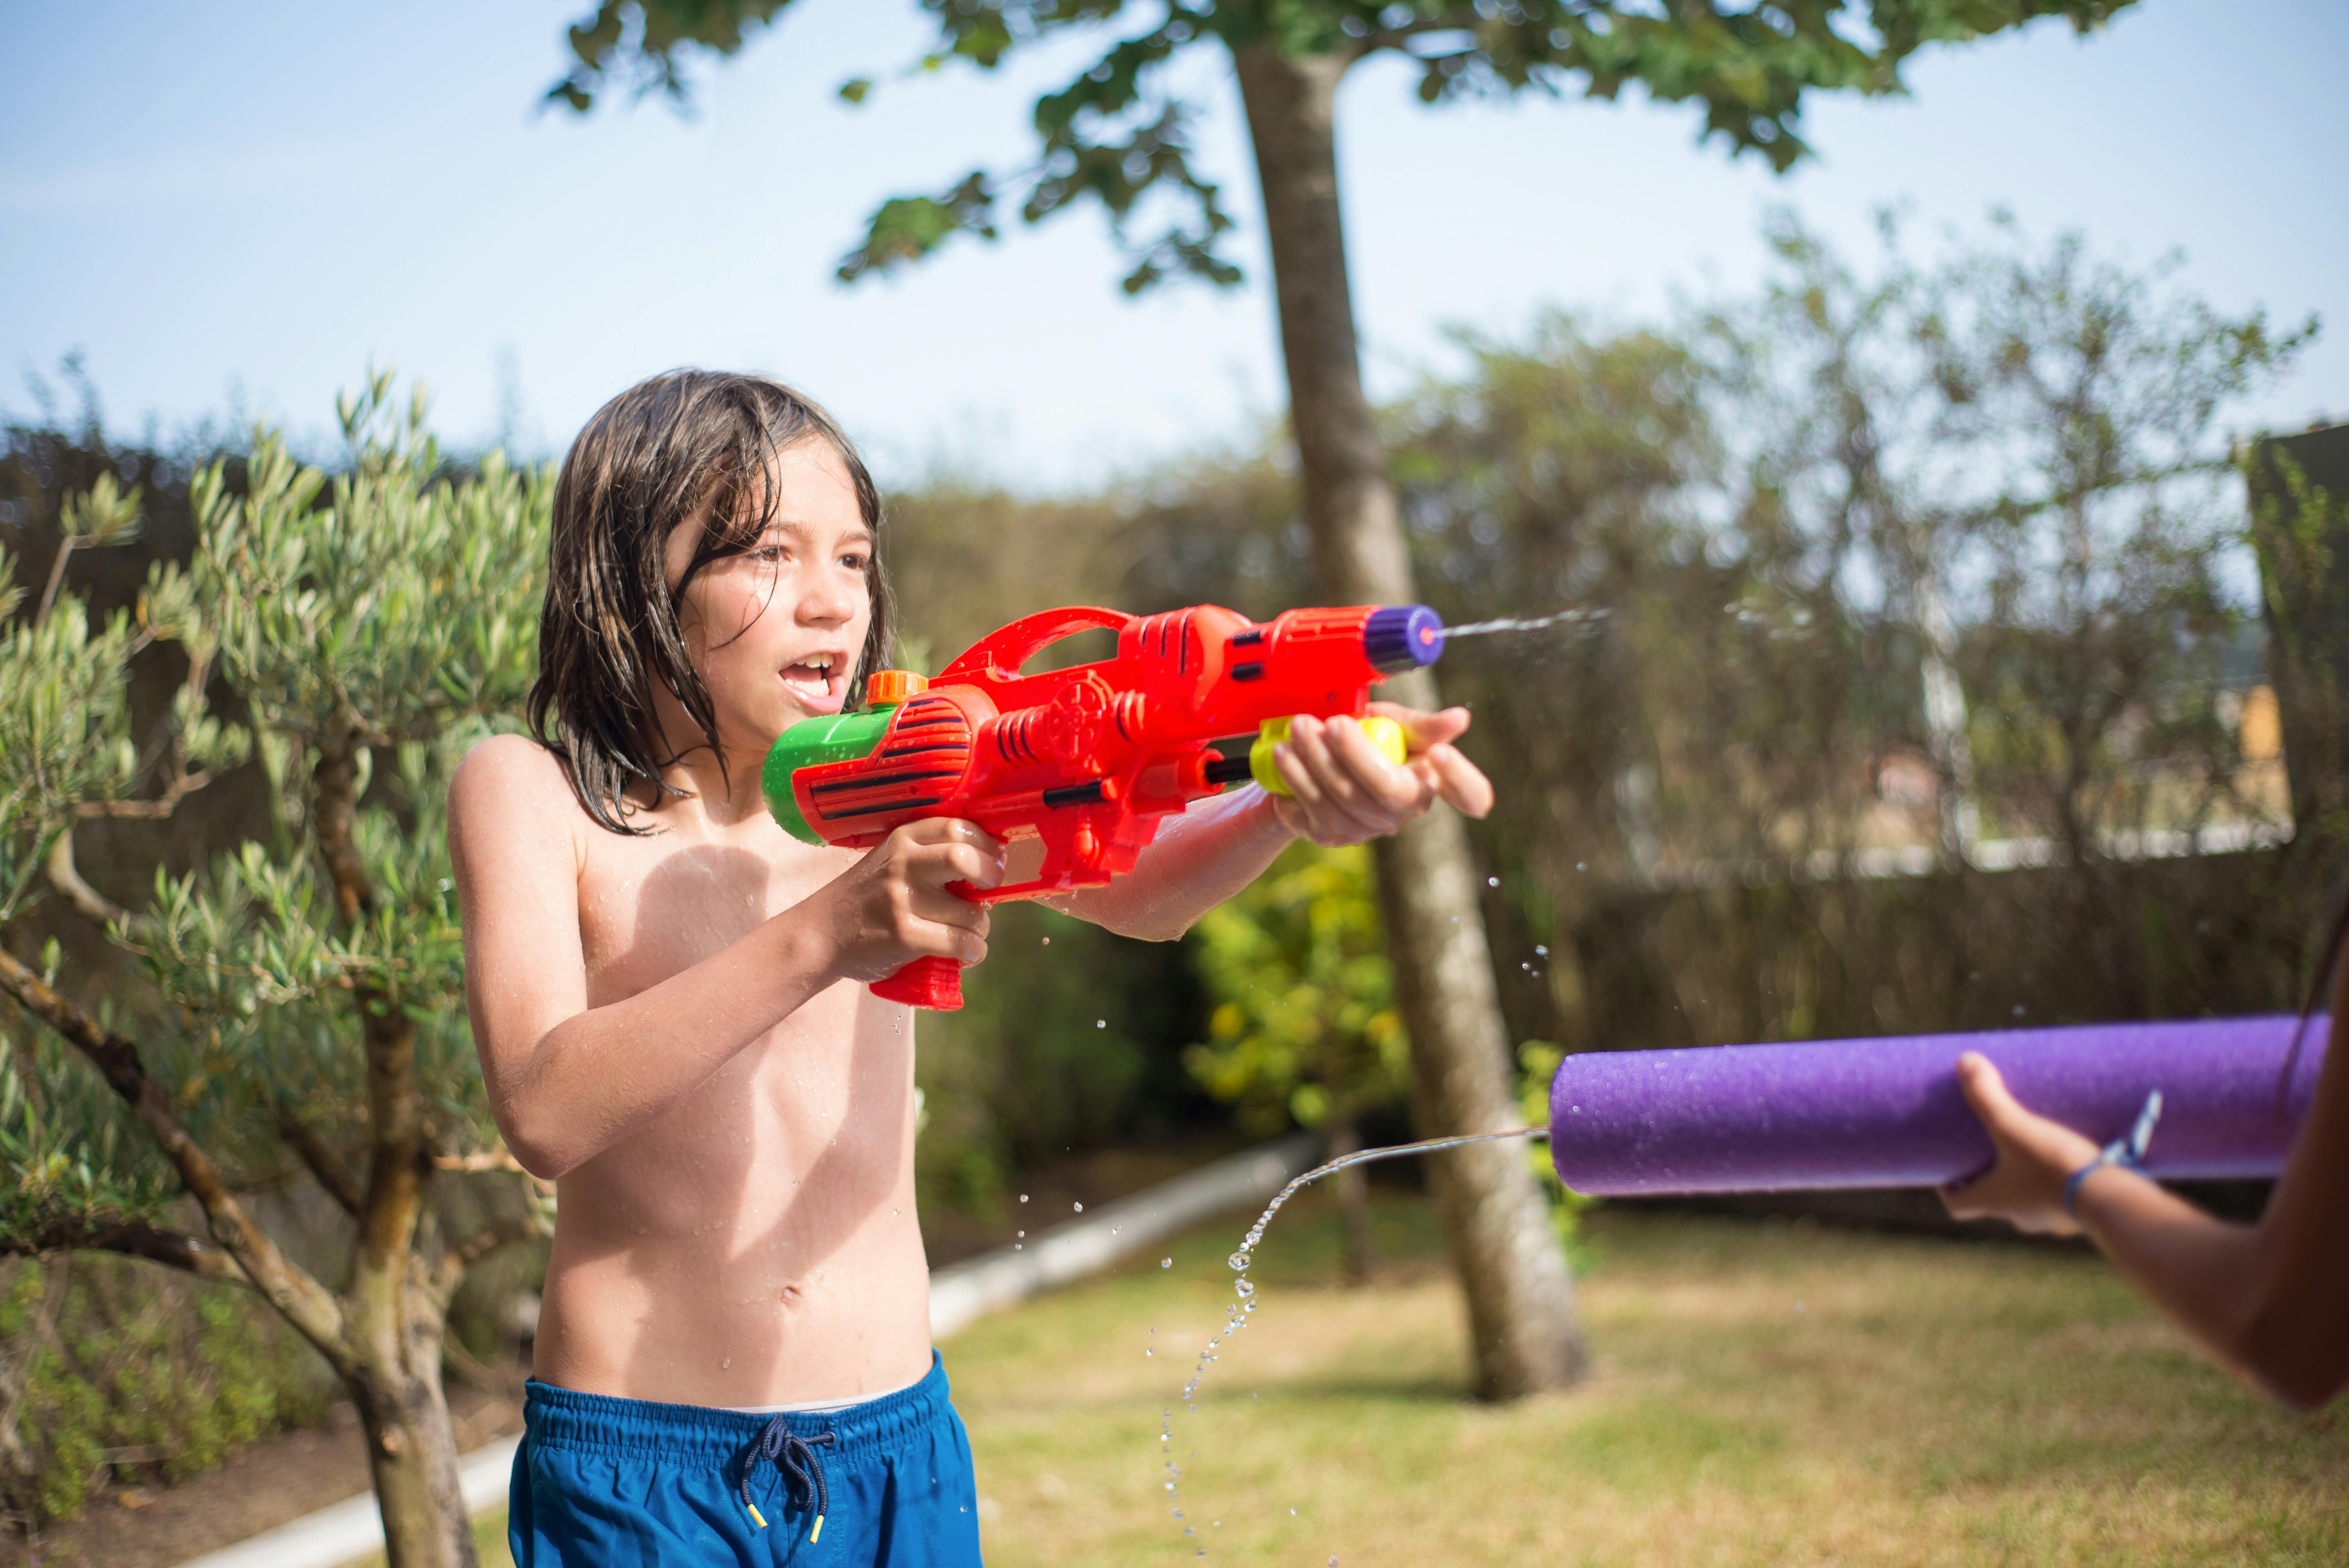 A boy playing with a water gun | Source: Pexels